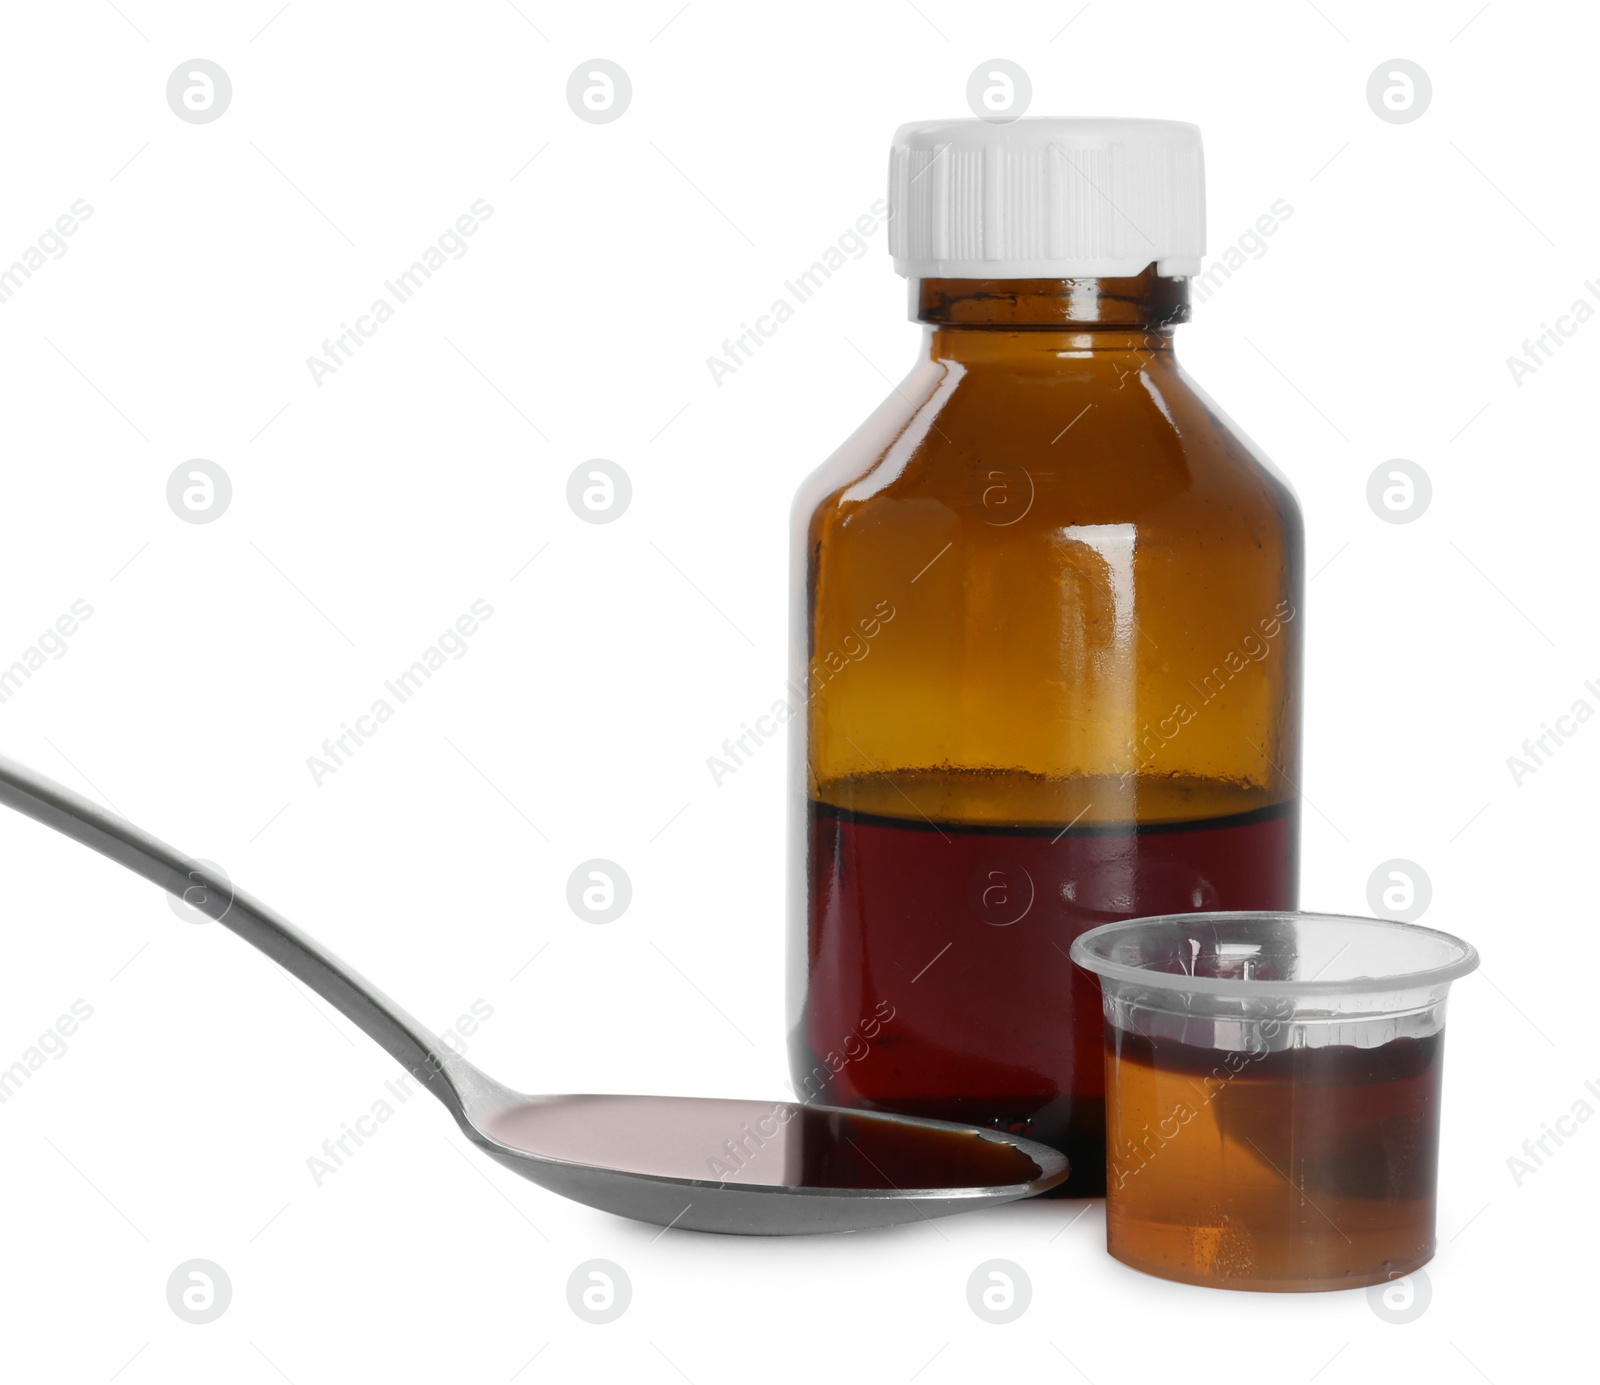 Photo of Bottle of cough syrup, spoon and measuring cup on white background